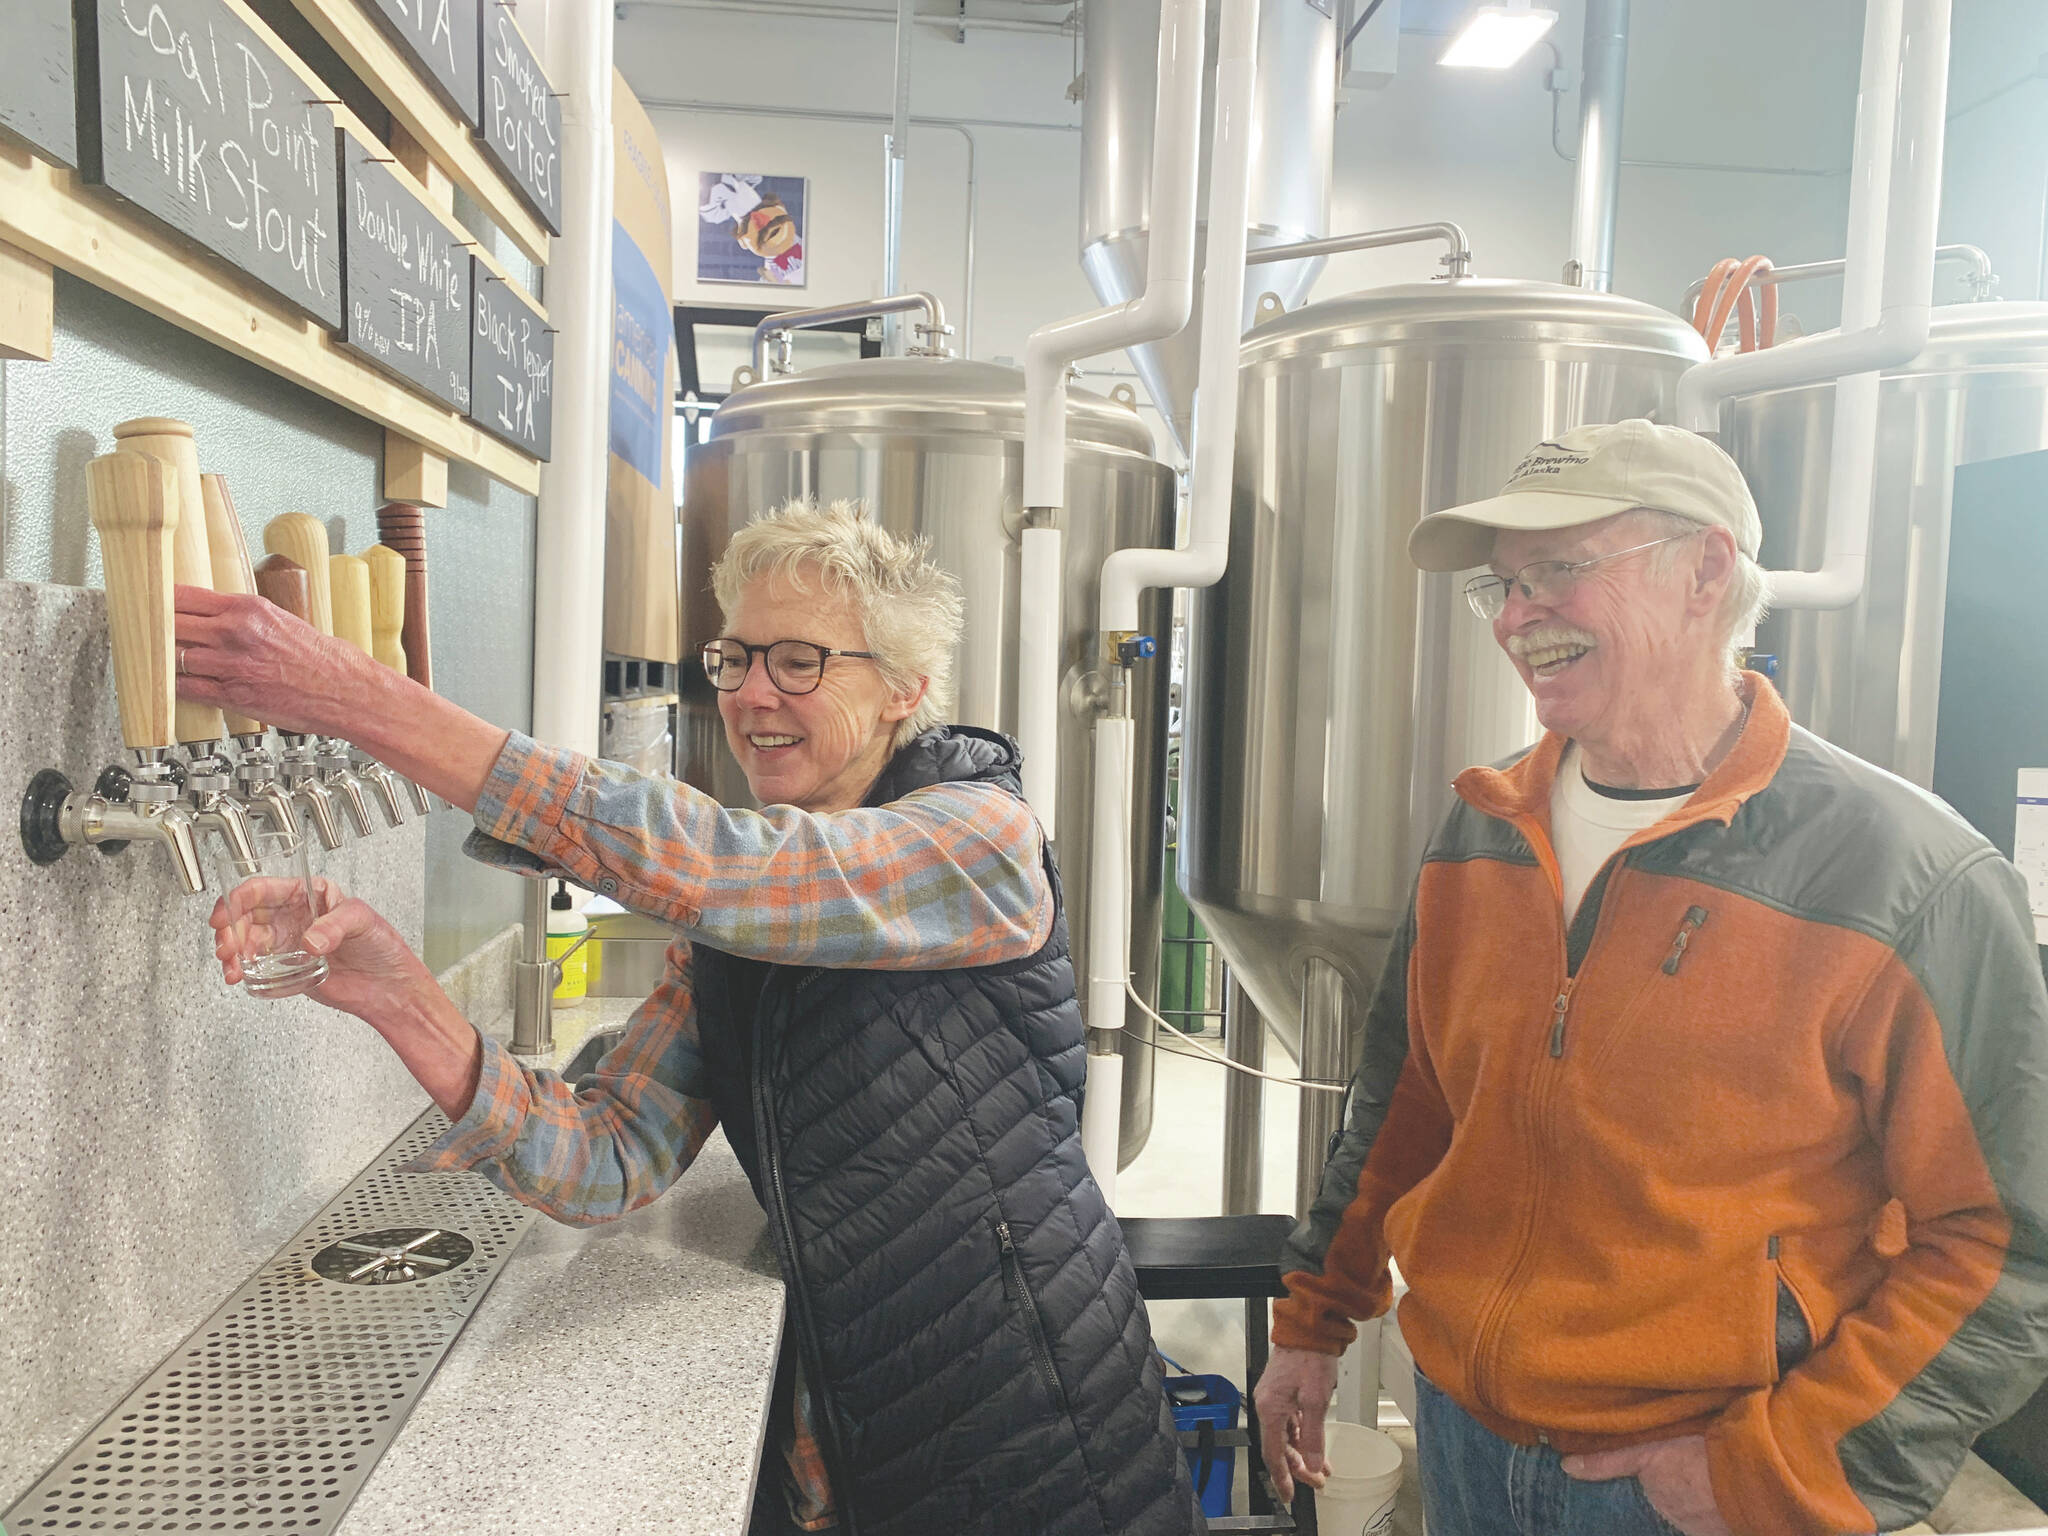 Sherry and Don Stead, owners of Grace Ridge Brewing, celebrate one year in their new location on Smoky Bay Way, Friday.